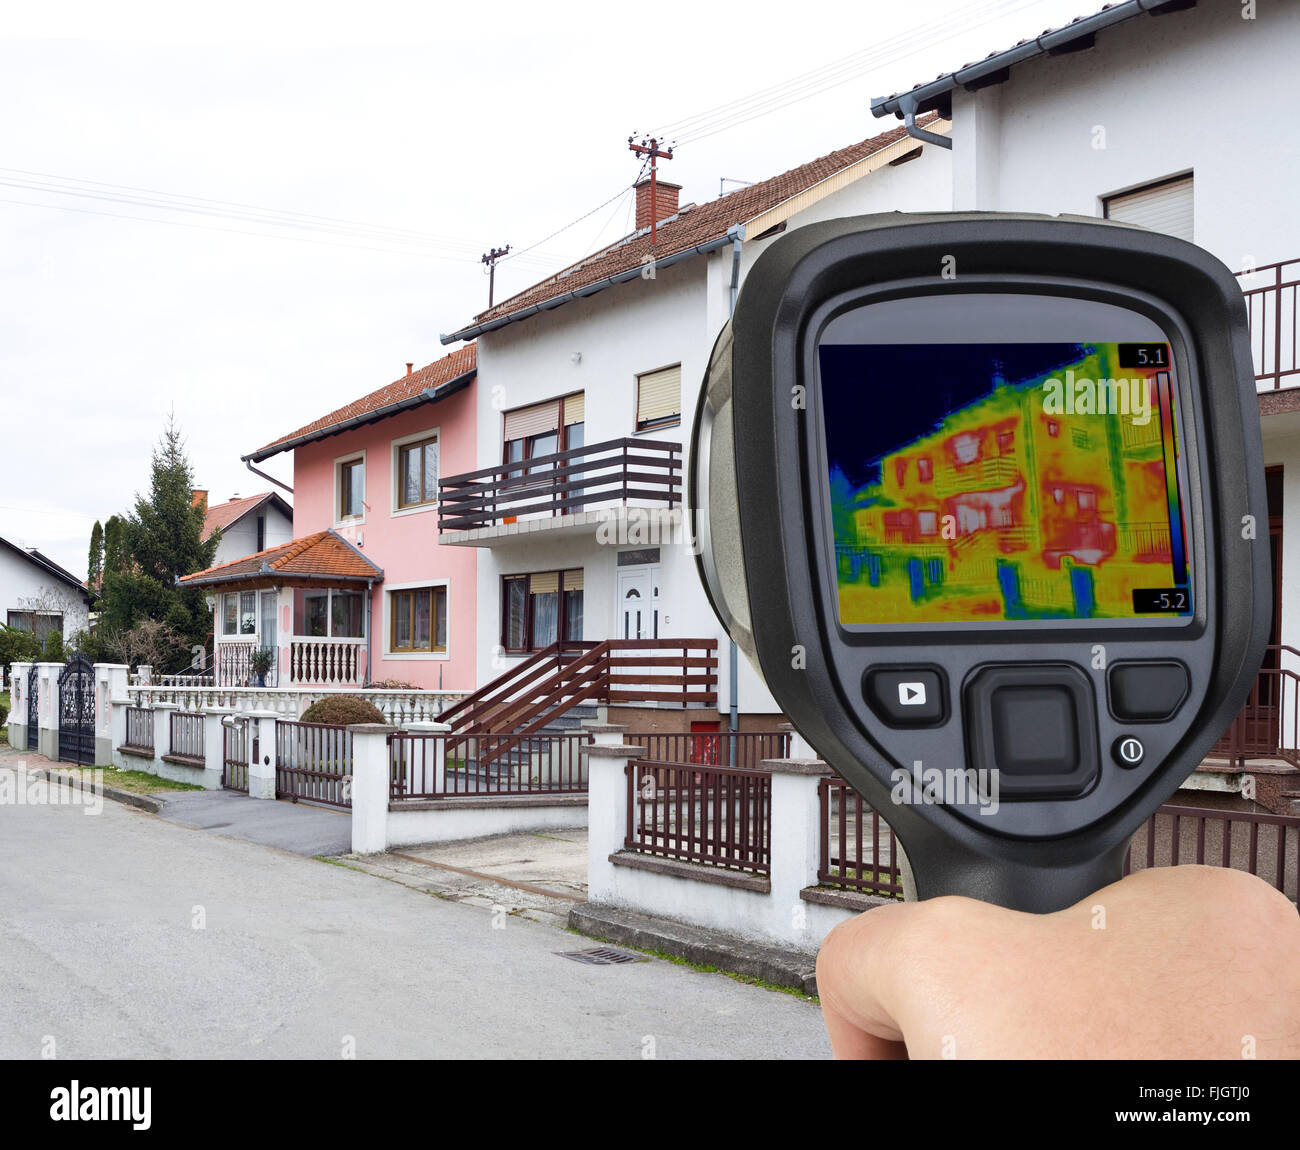 Thermal Image of House Facade Stock Photo